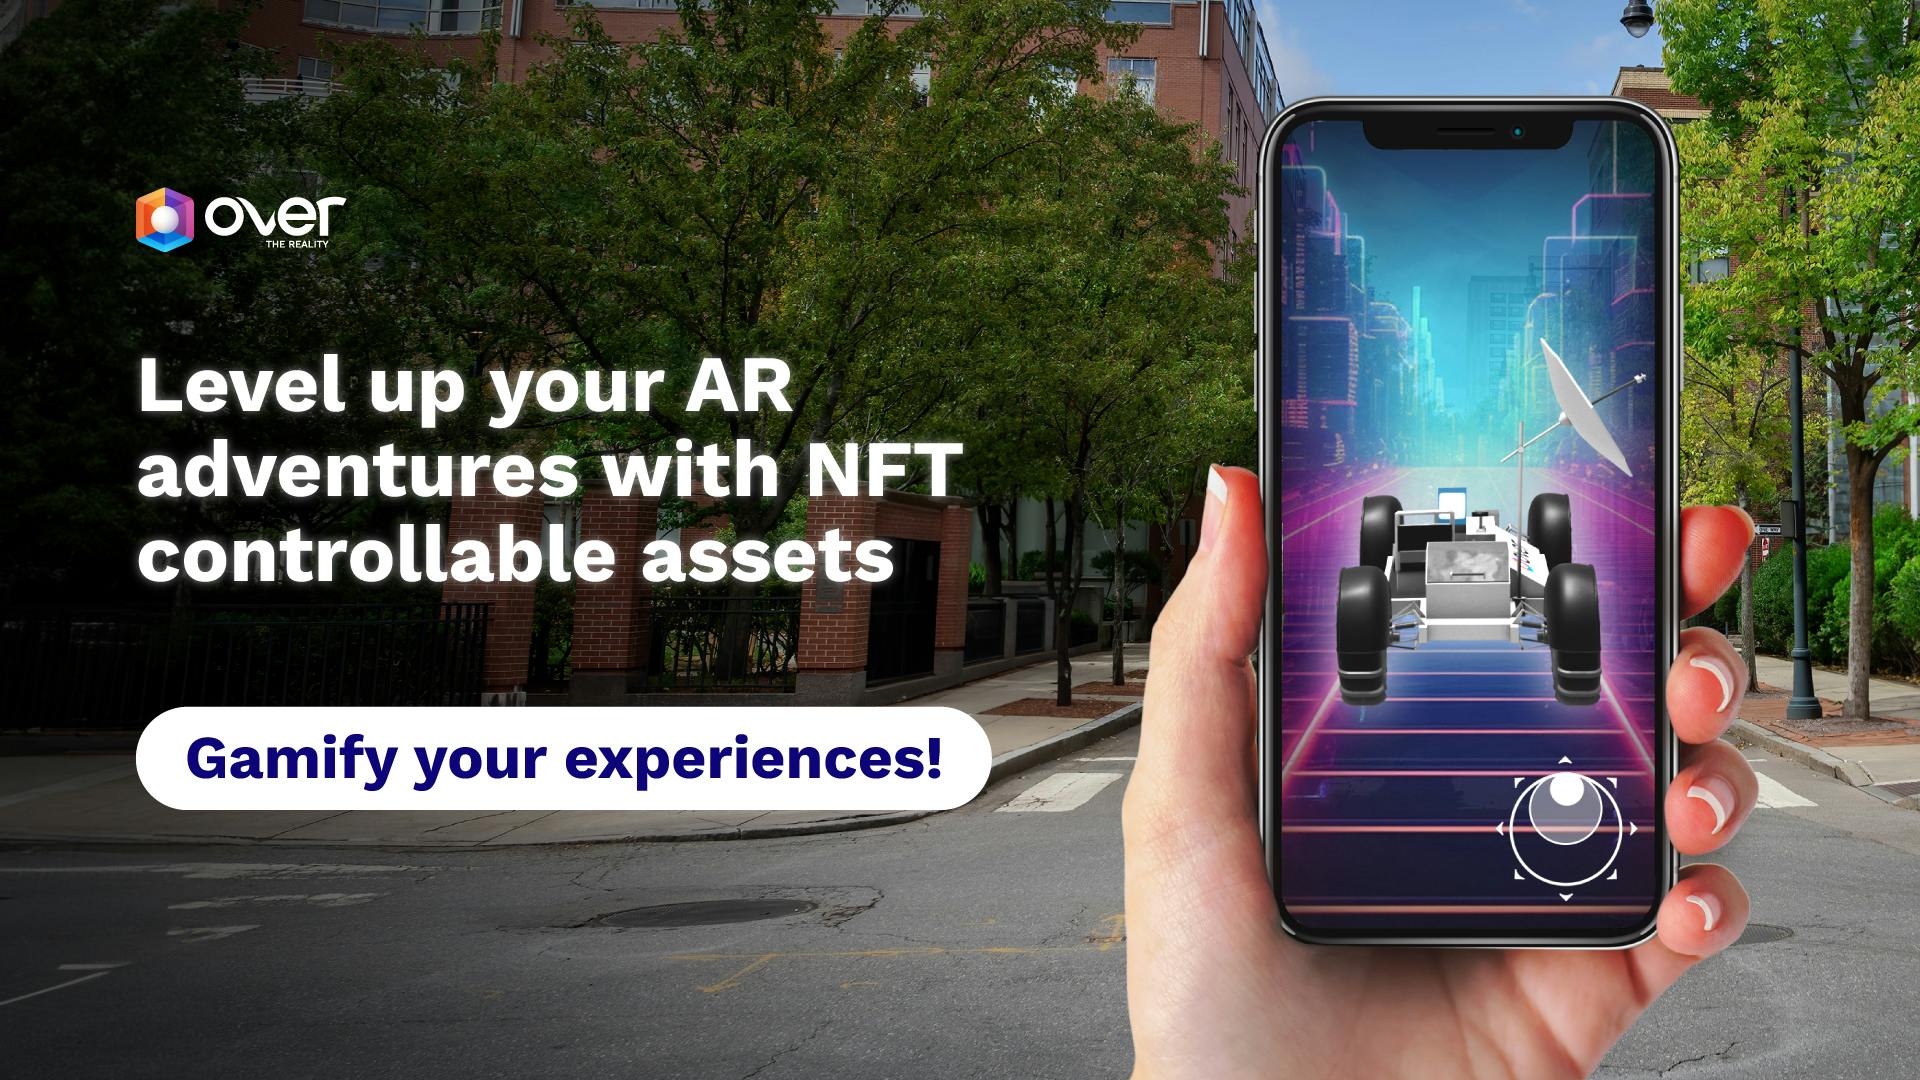 Take control of your AR gaming experience